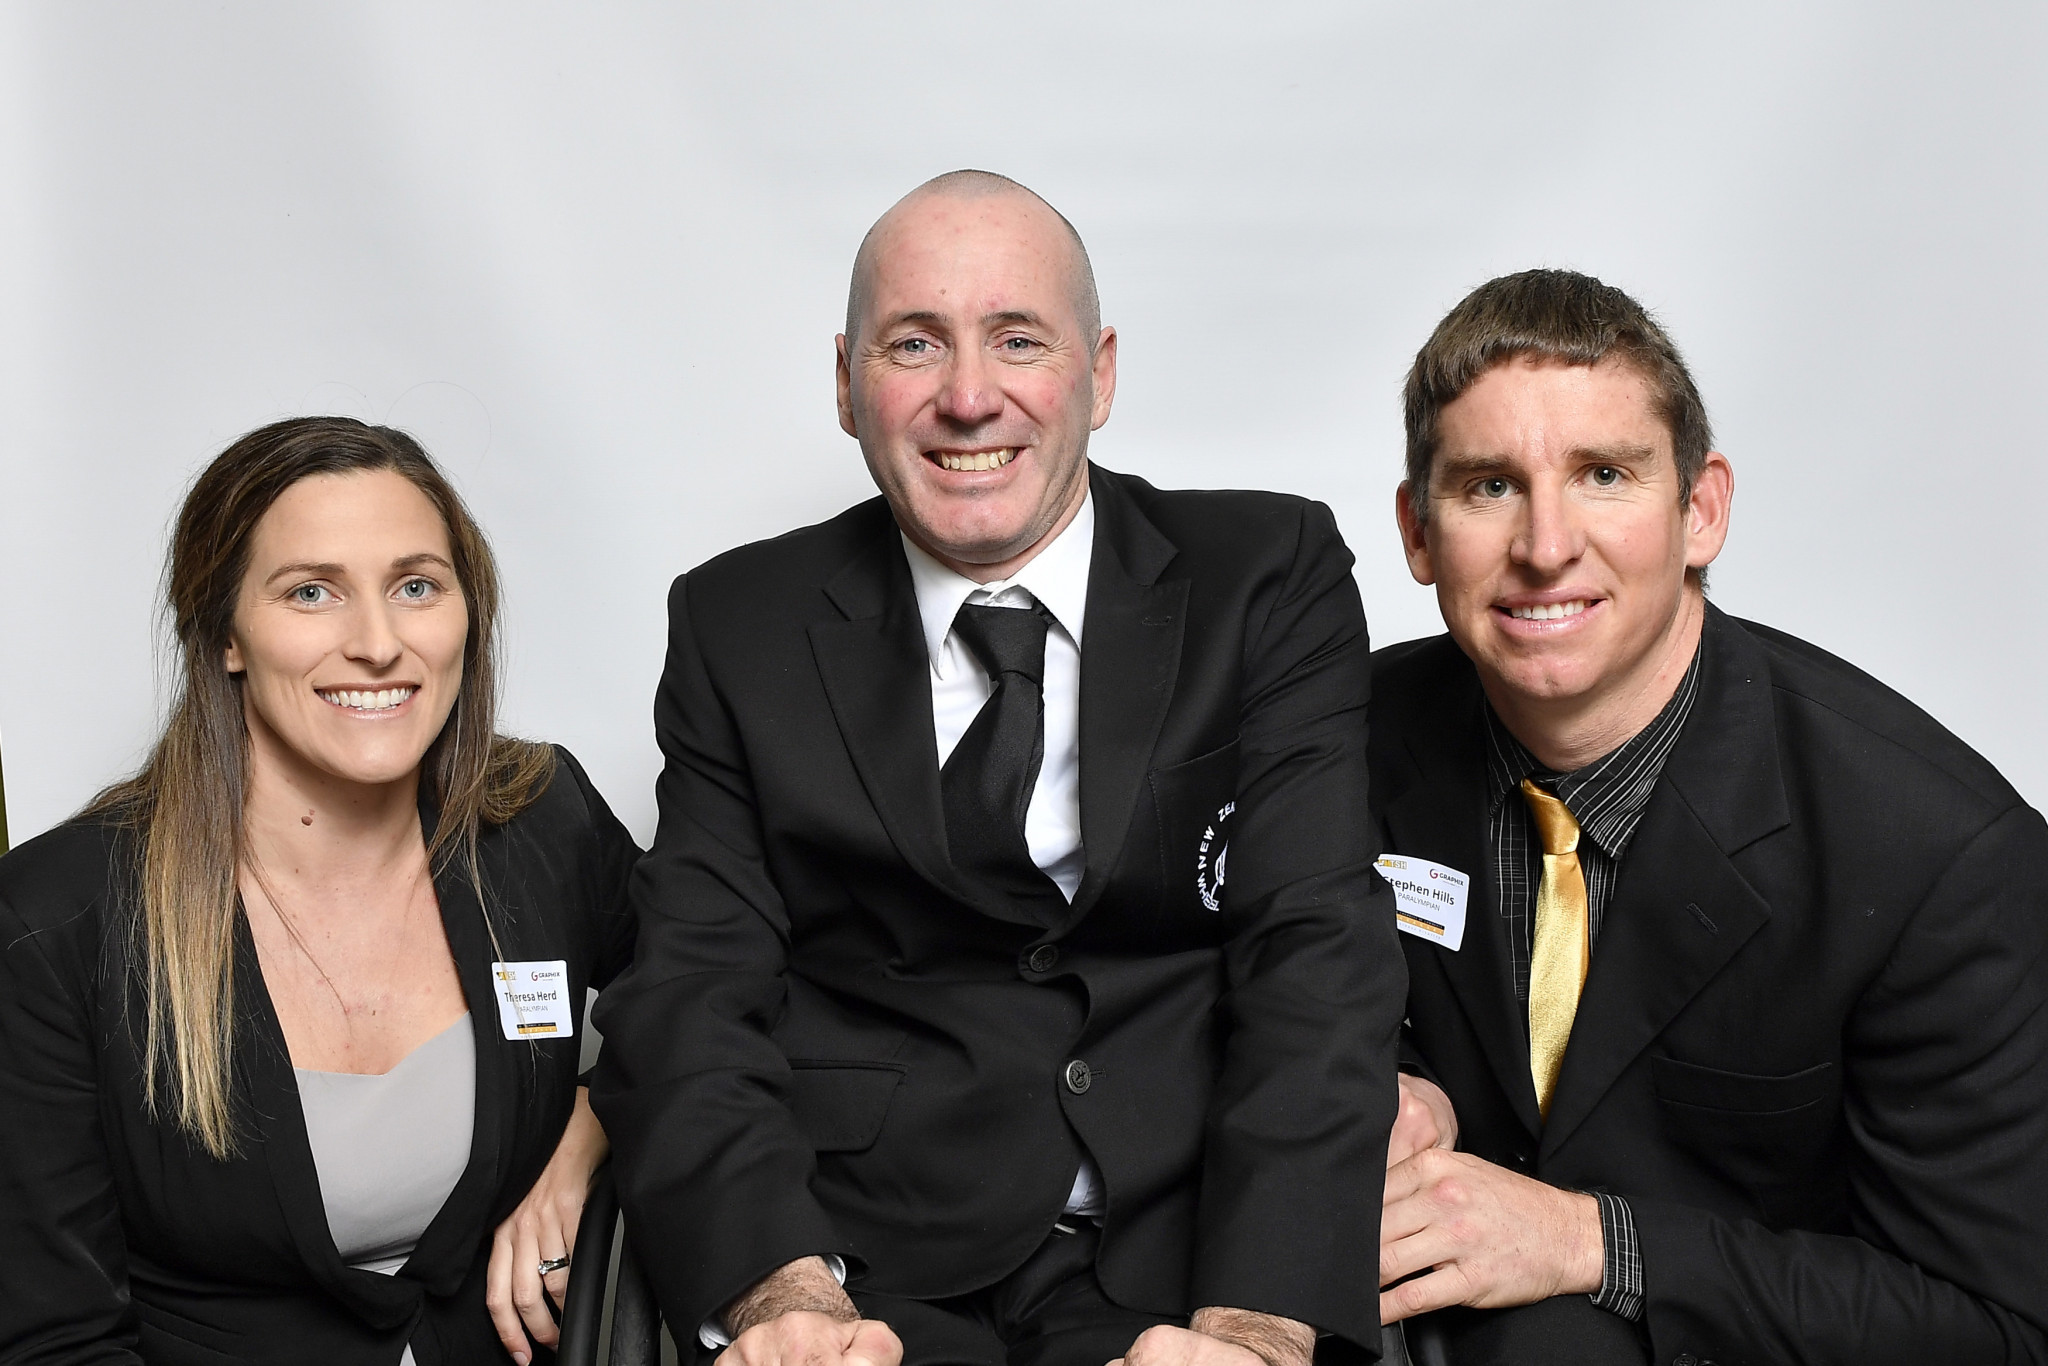 New Zealand Paralympians recognised during latest Celebration Project event